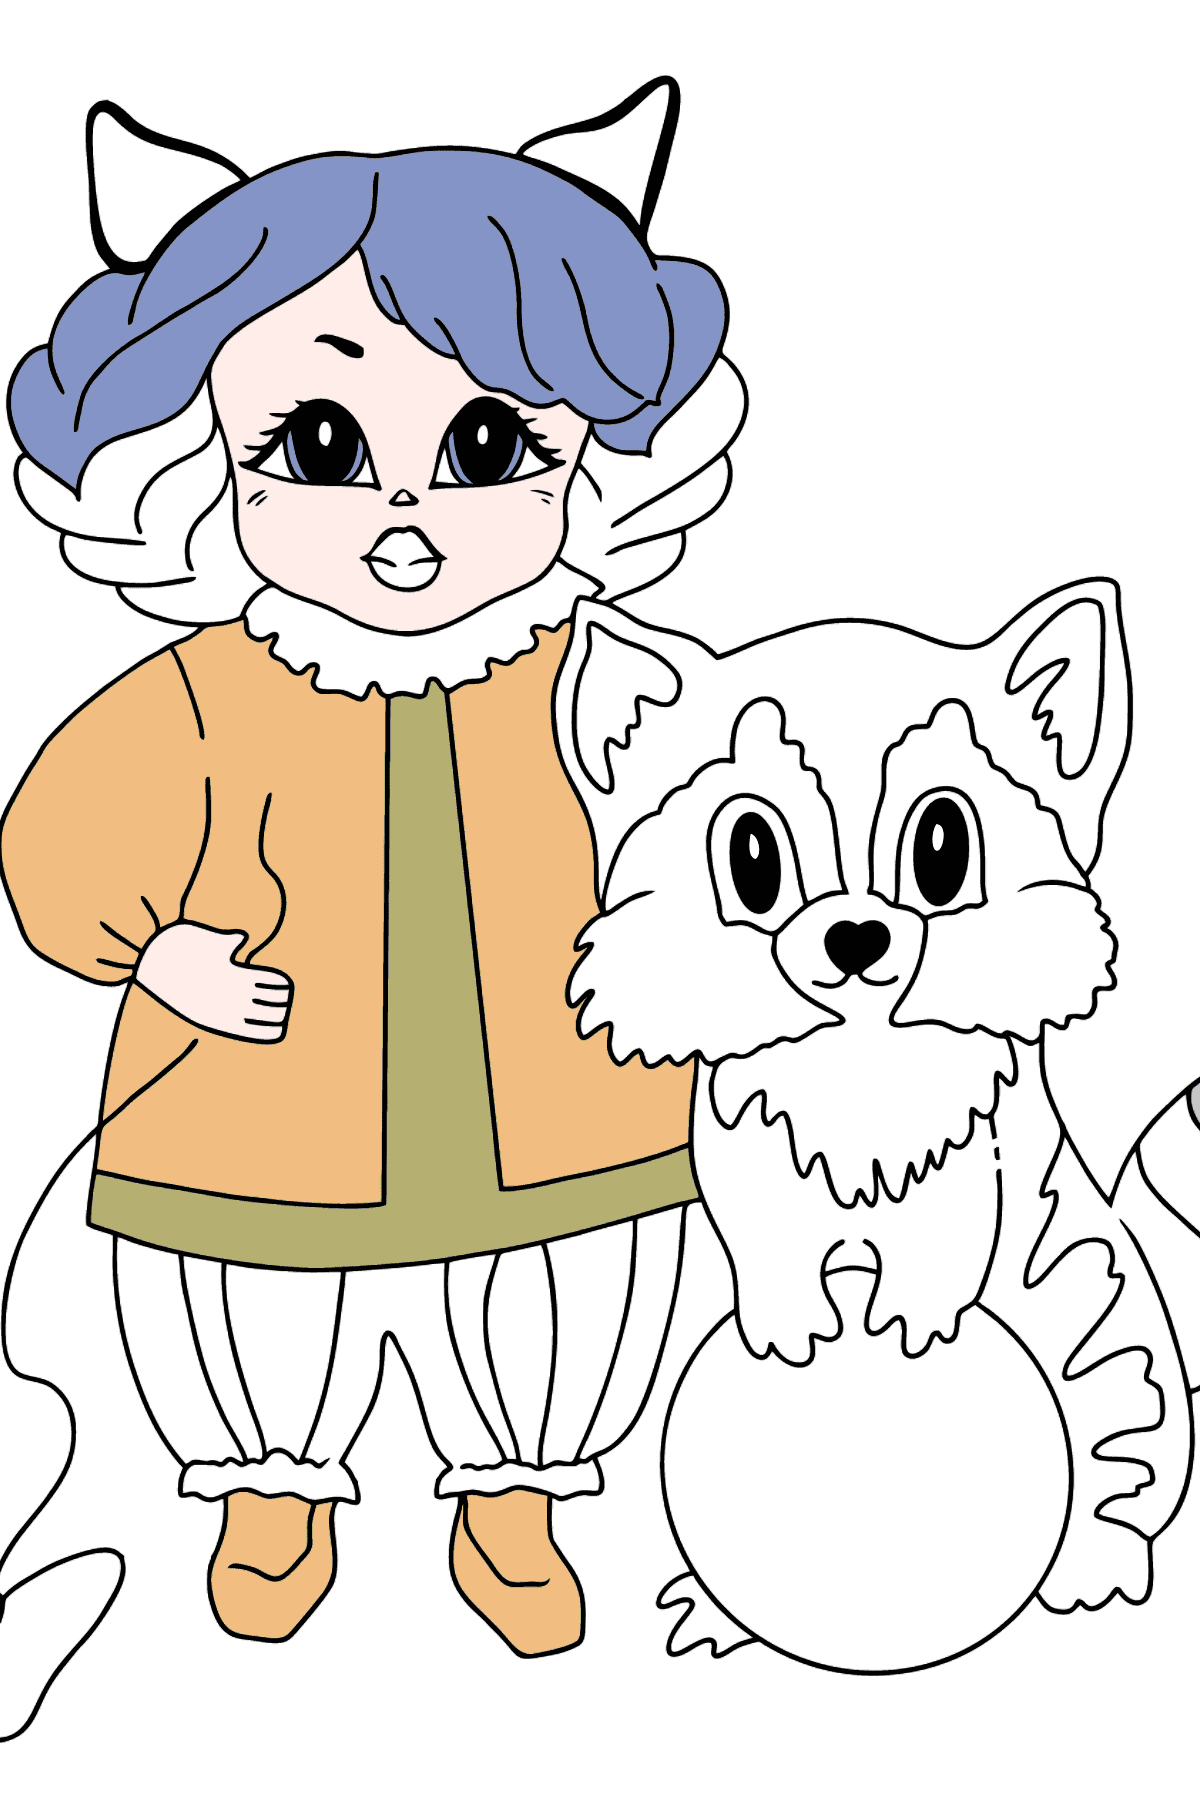 Coloring Page - A Princess with a Cat and a Racoon - Coloring Pages for Kids